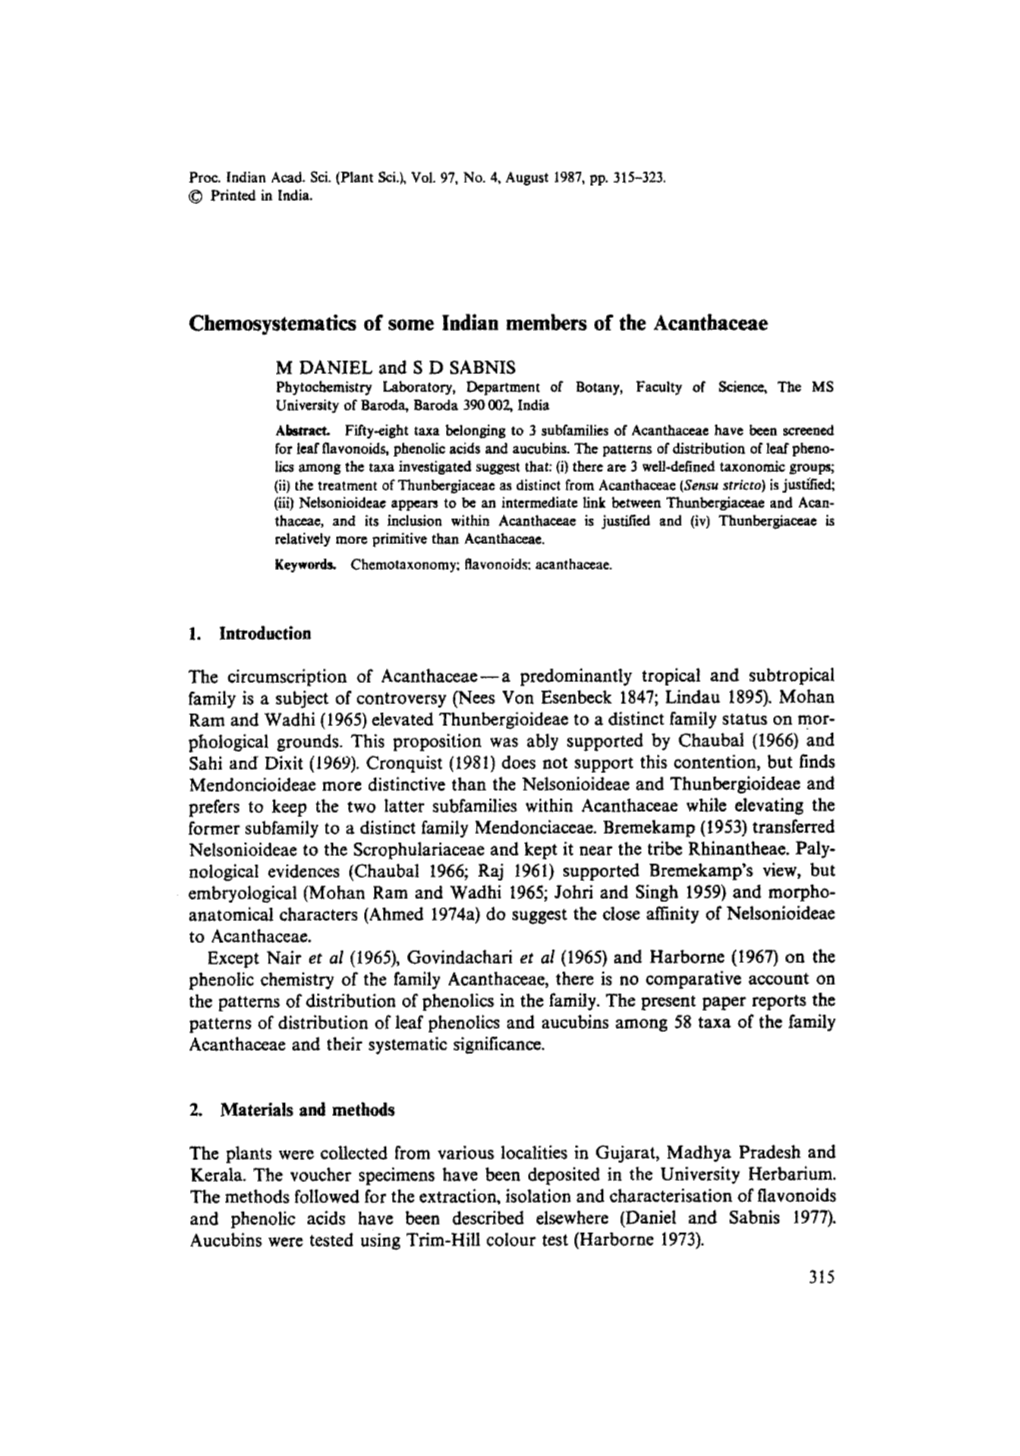 Chemosystematics of Some Indian Members of the Acanthaceae